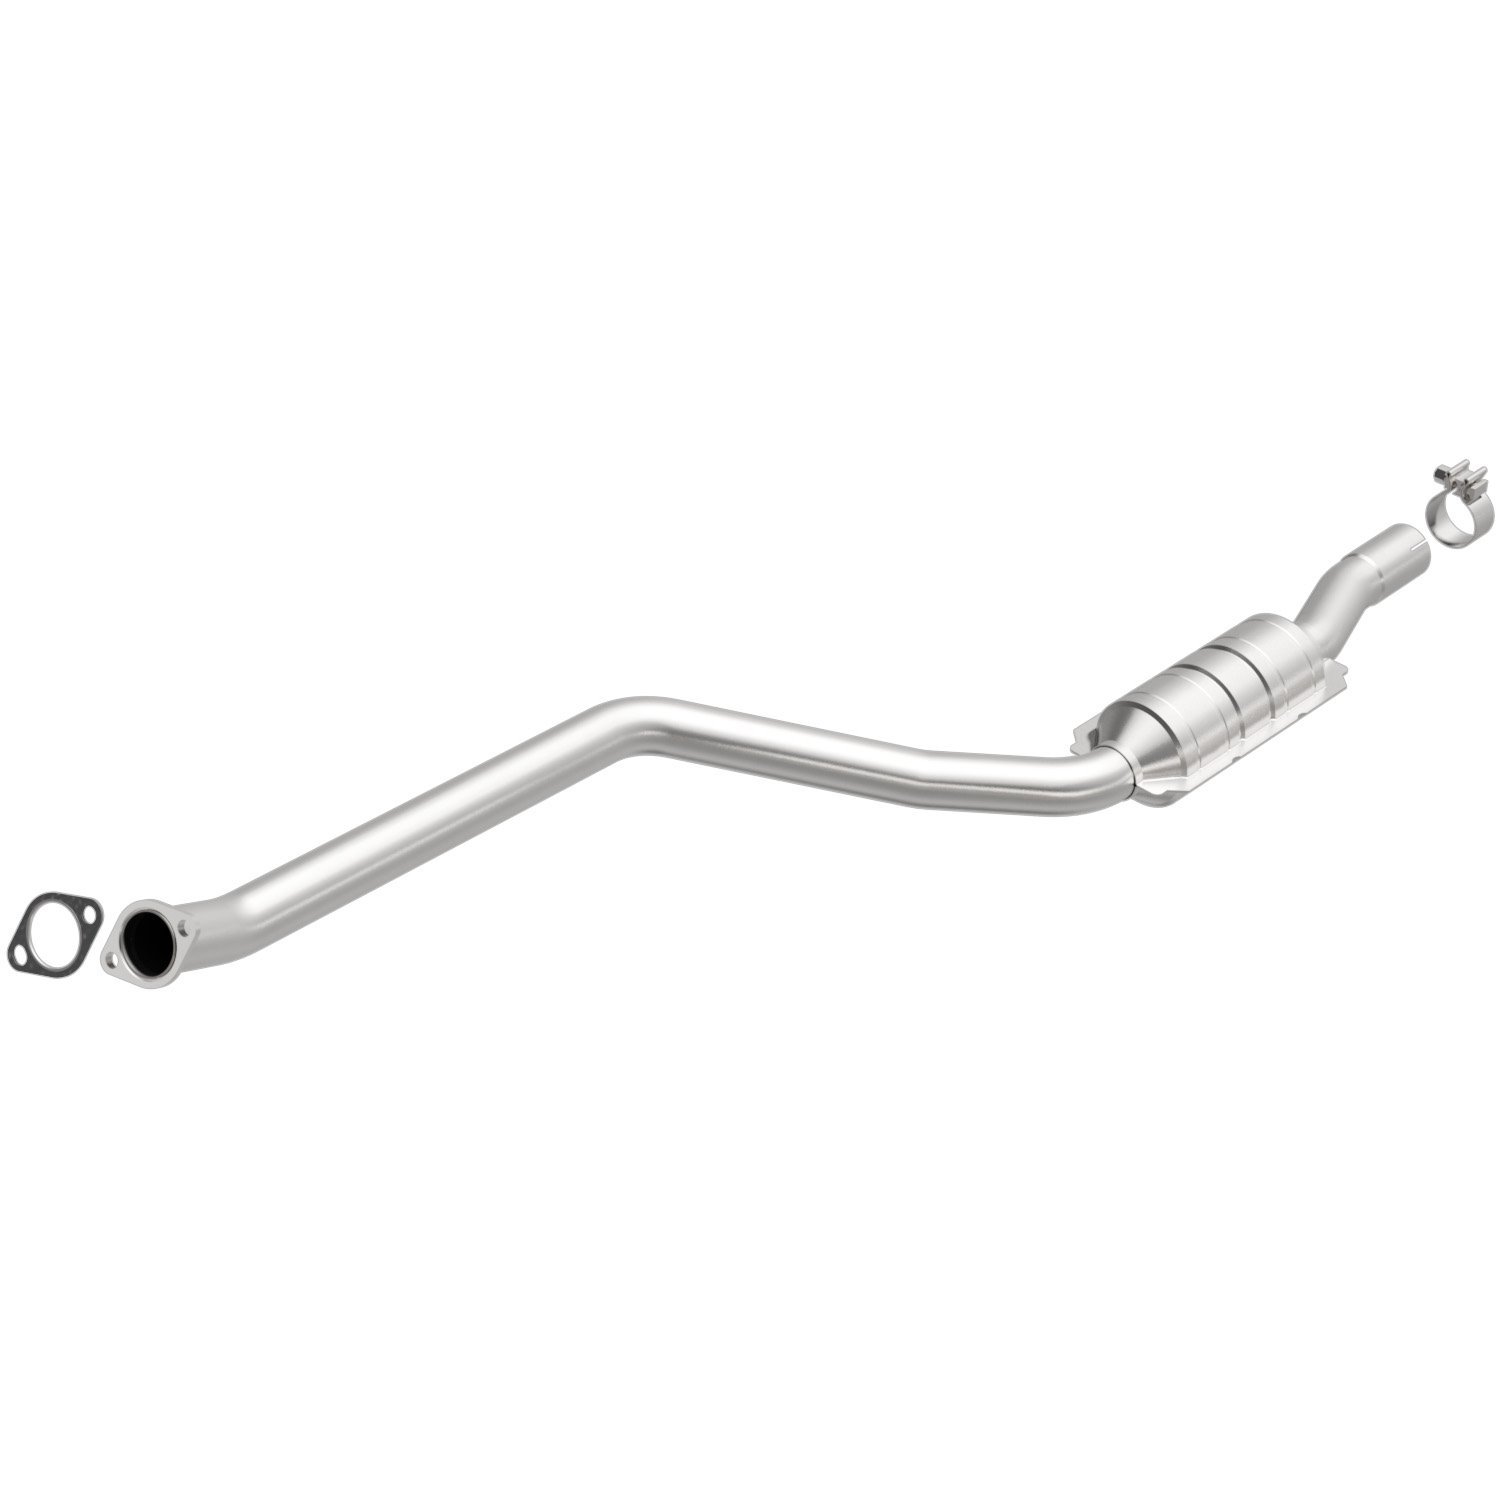 HM Grade Federal / EPA Compliant Direct-Fit Catalytic Converter 24374